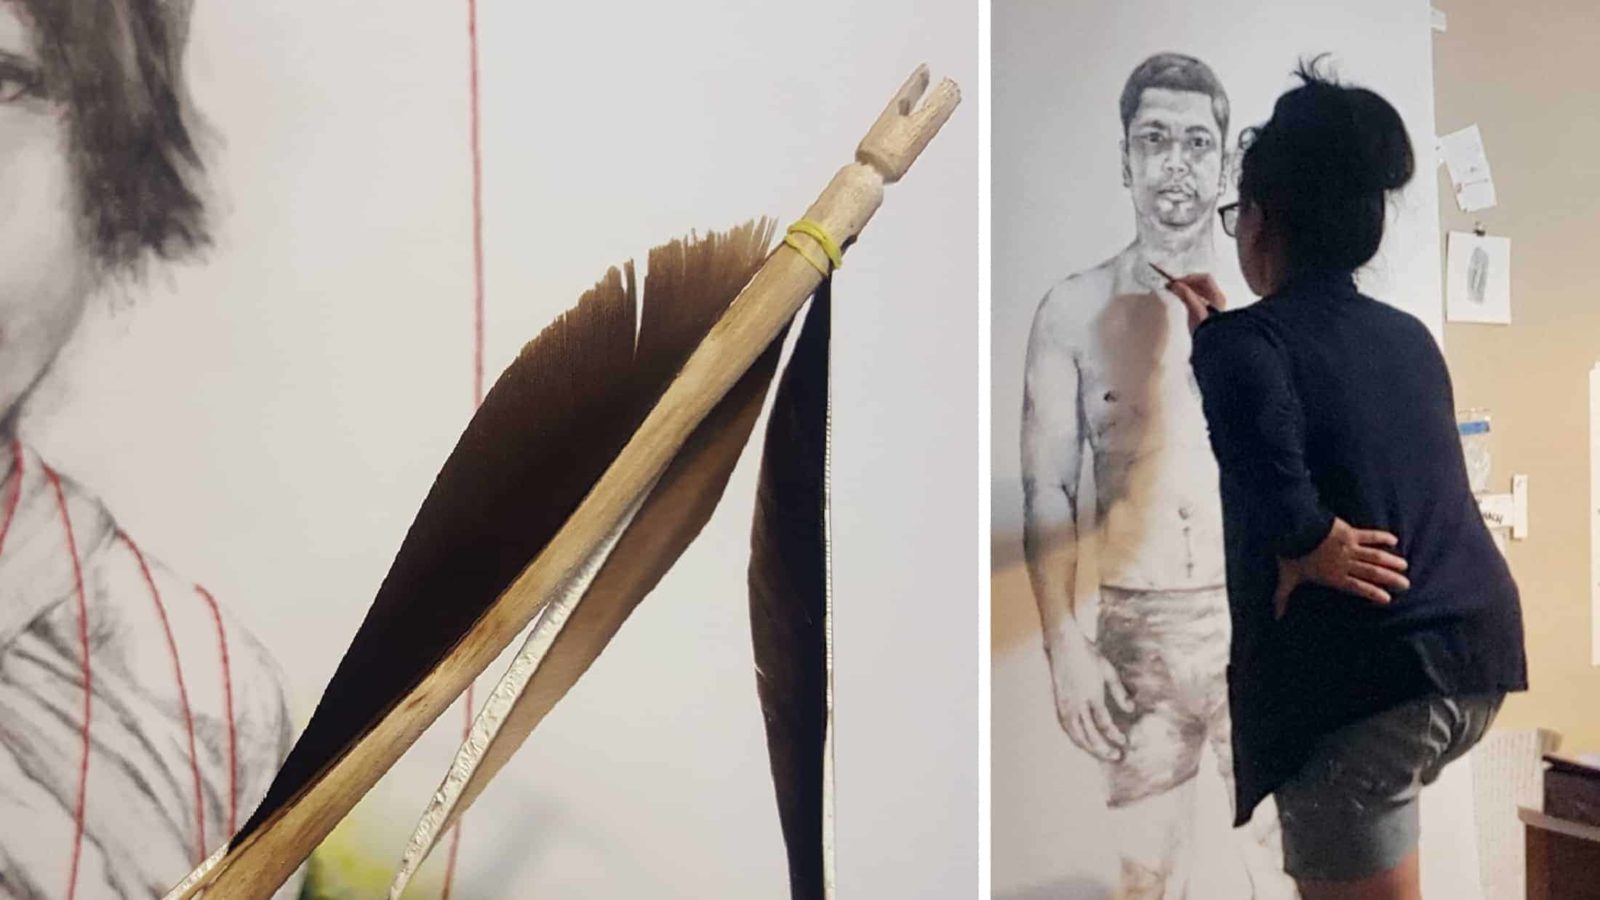 Trinh Mai creates arrows and draws a lifesized portrait of her husband, Hien, for an art installation in her studio in Southern California. Image courtesy of the artist. Images courtesy of the artist